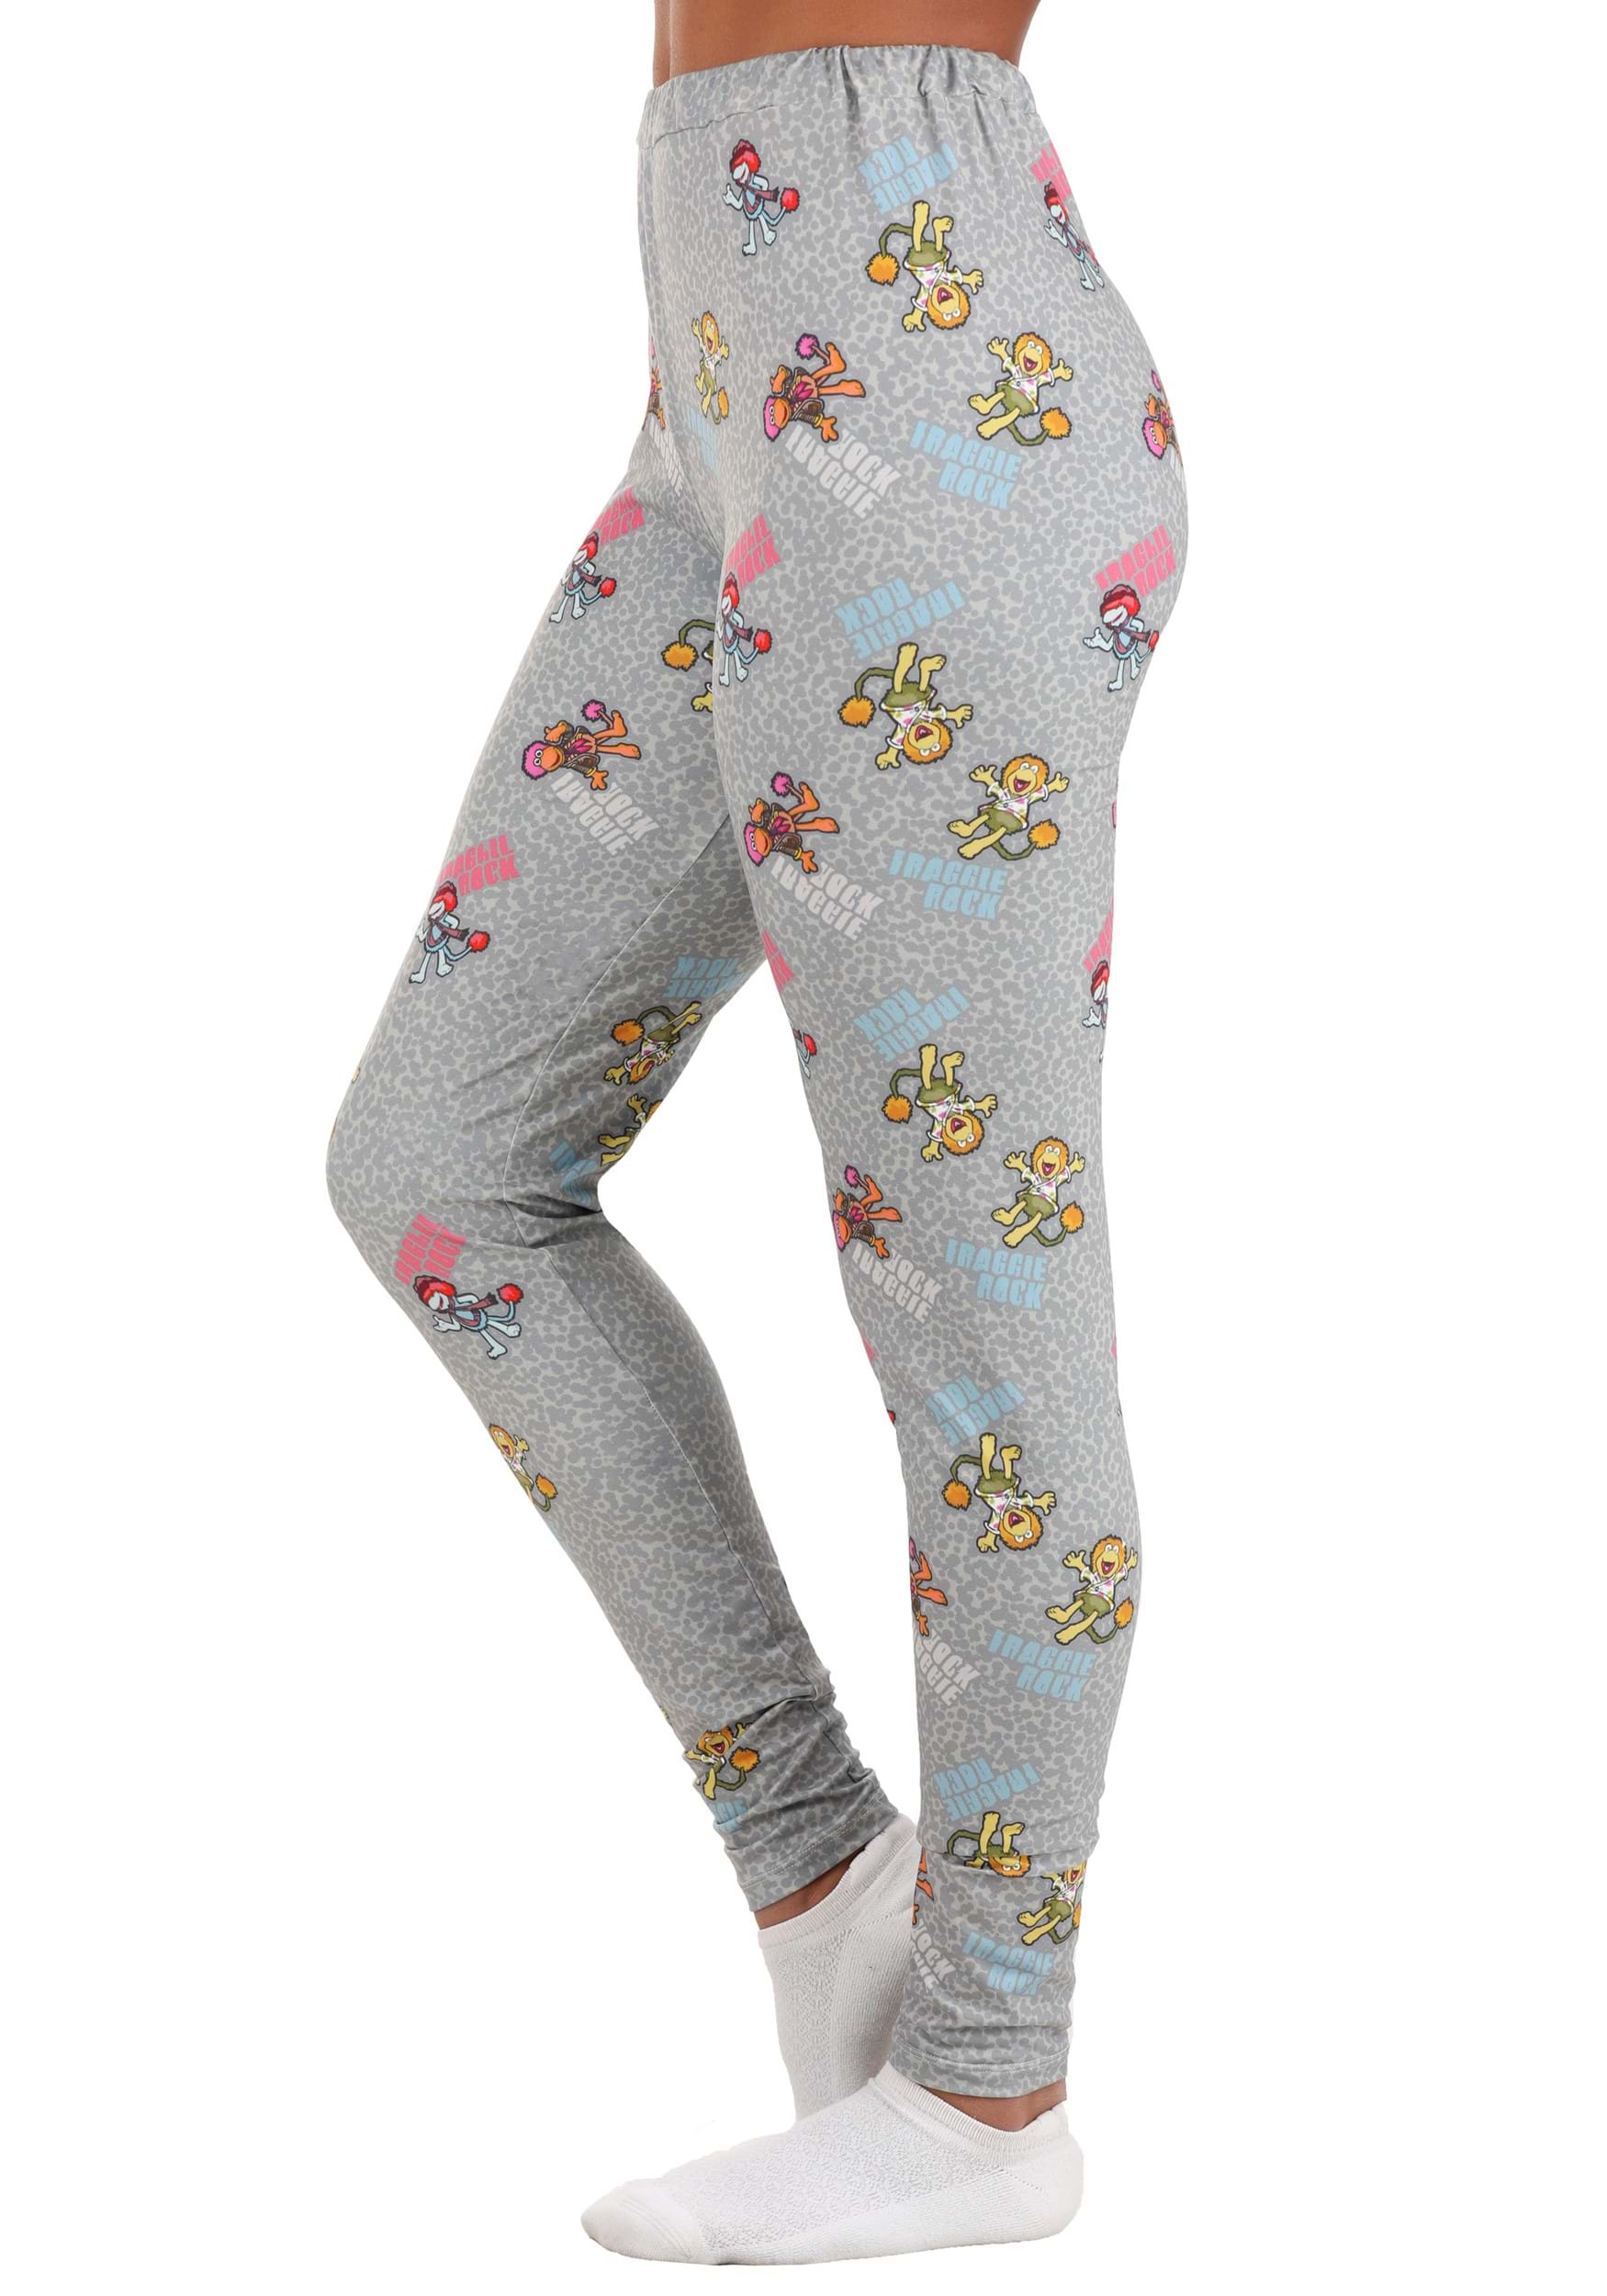 Fraggle Rock Leggings For Adults